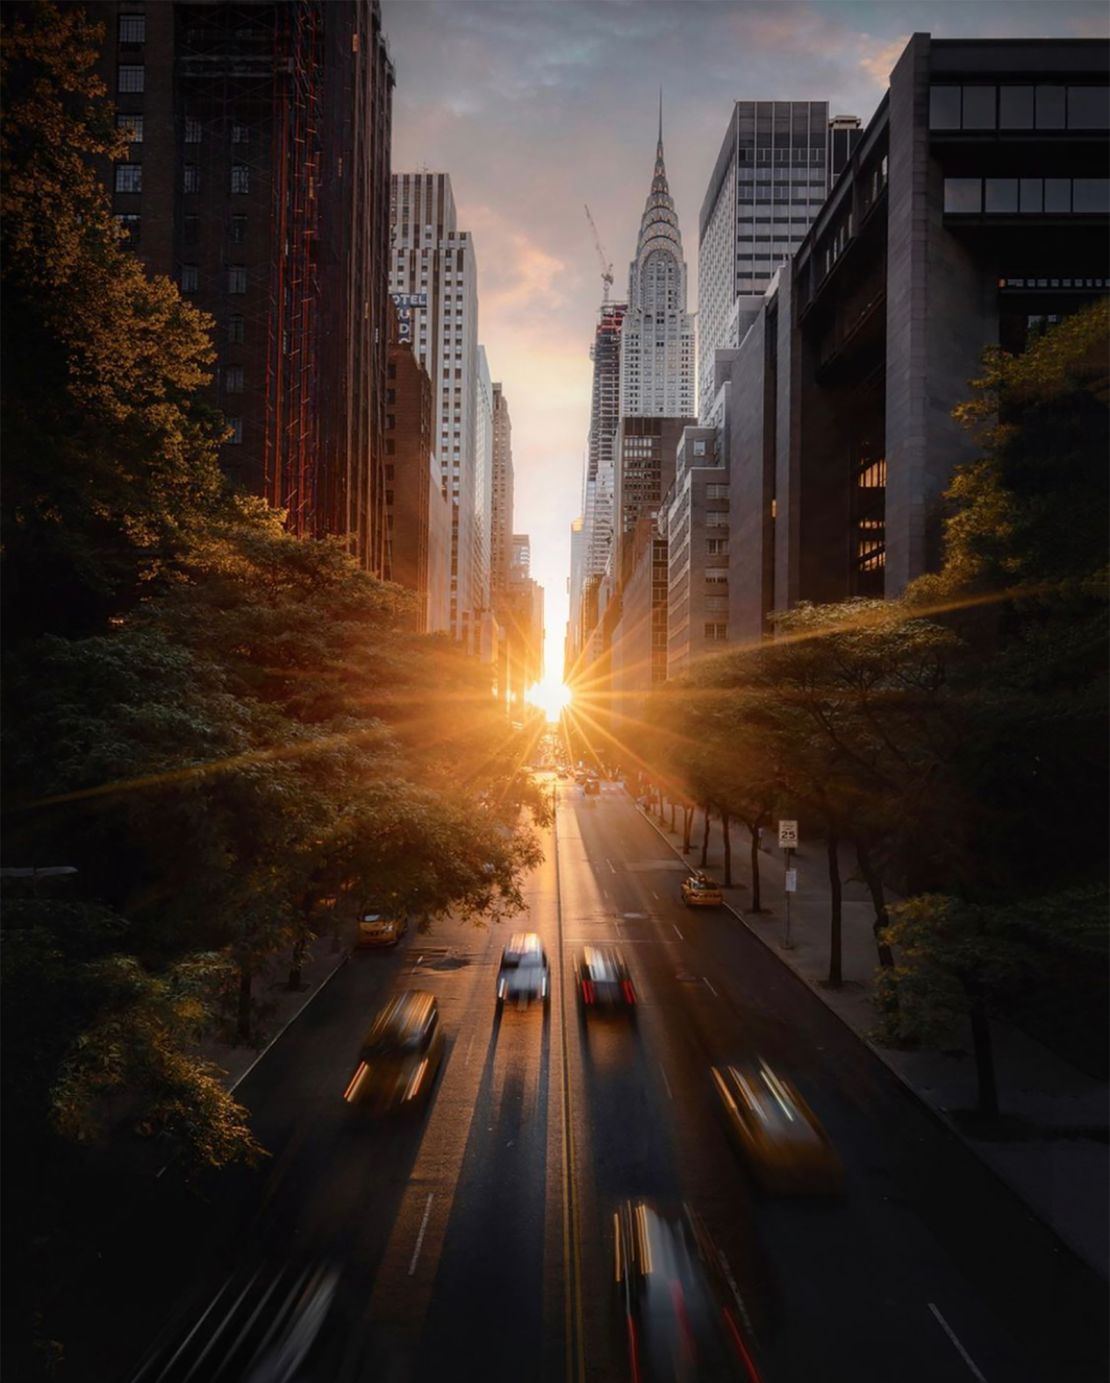 A picture of Manhattanhenge snapped by New York photographer Billy Dinh.